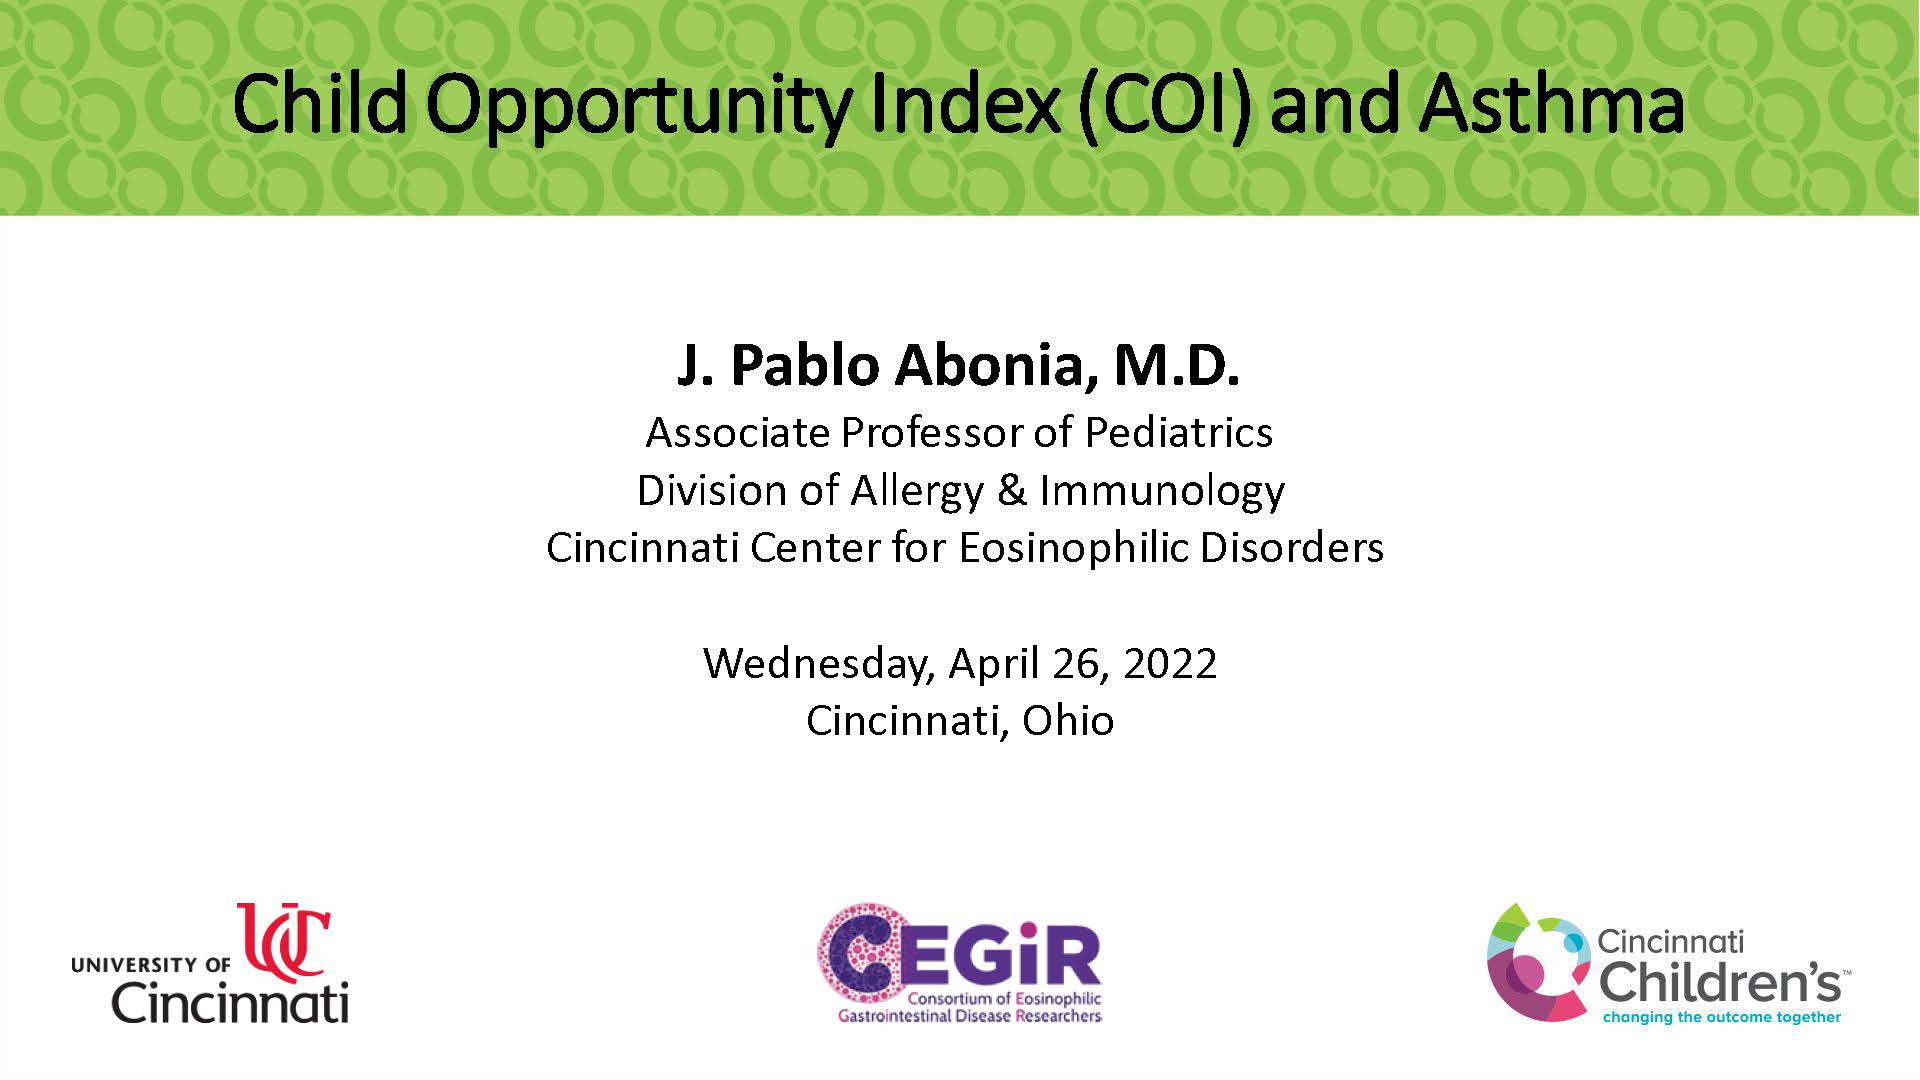 The introductory slide for a presentation by J. Pablo Abonia, MD on Child Opportunity Index (COI) and Asthma